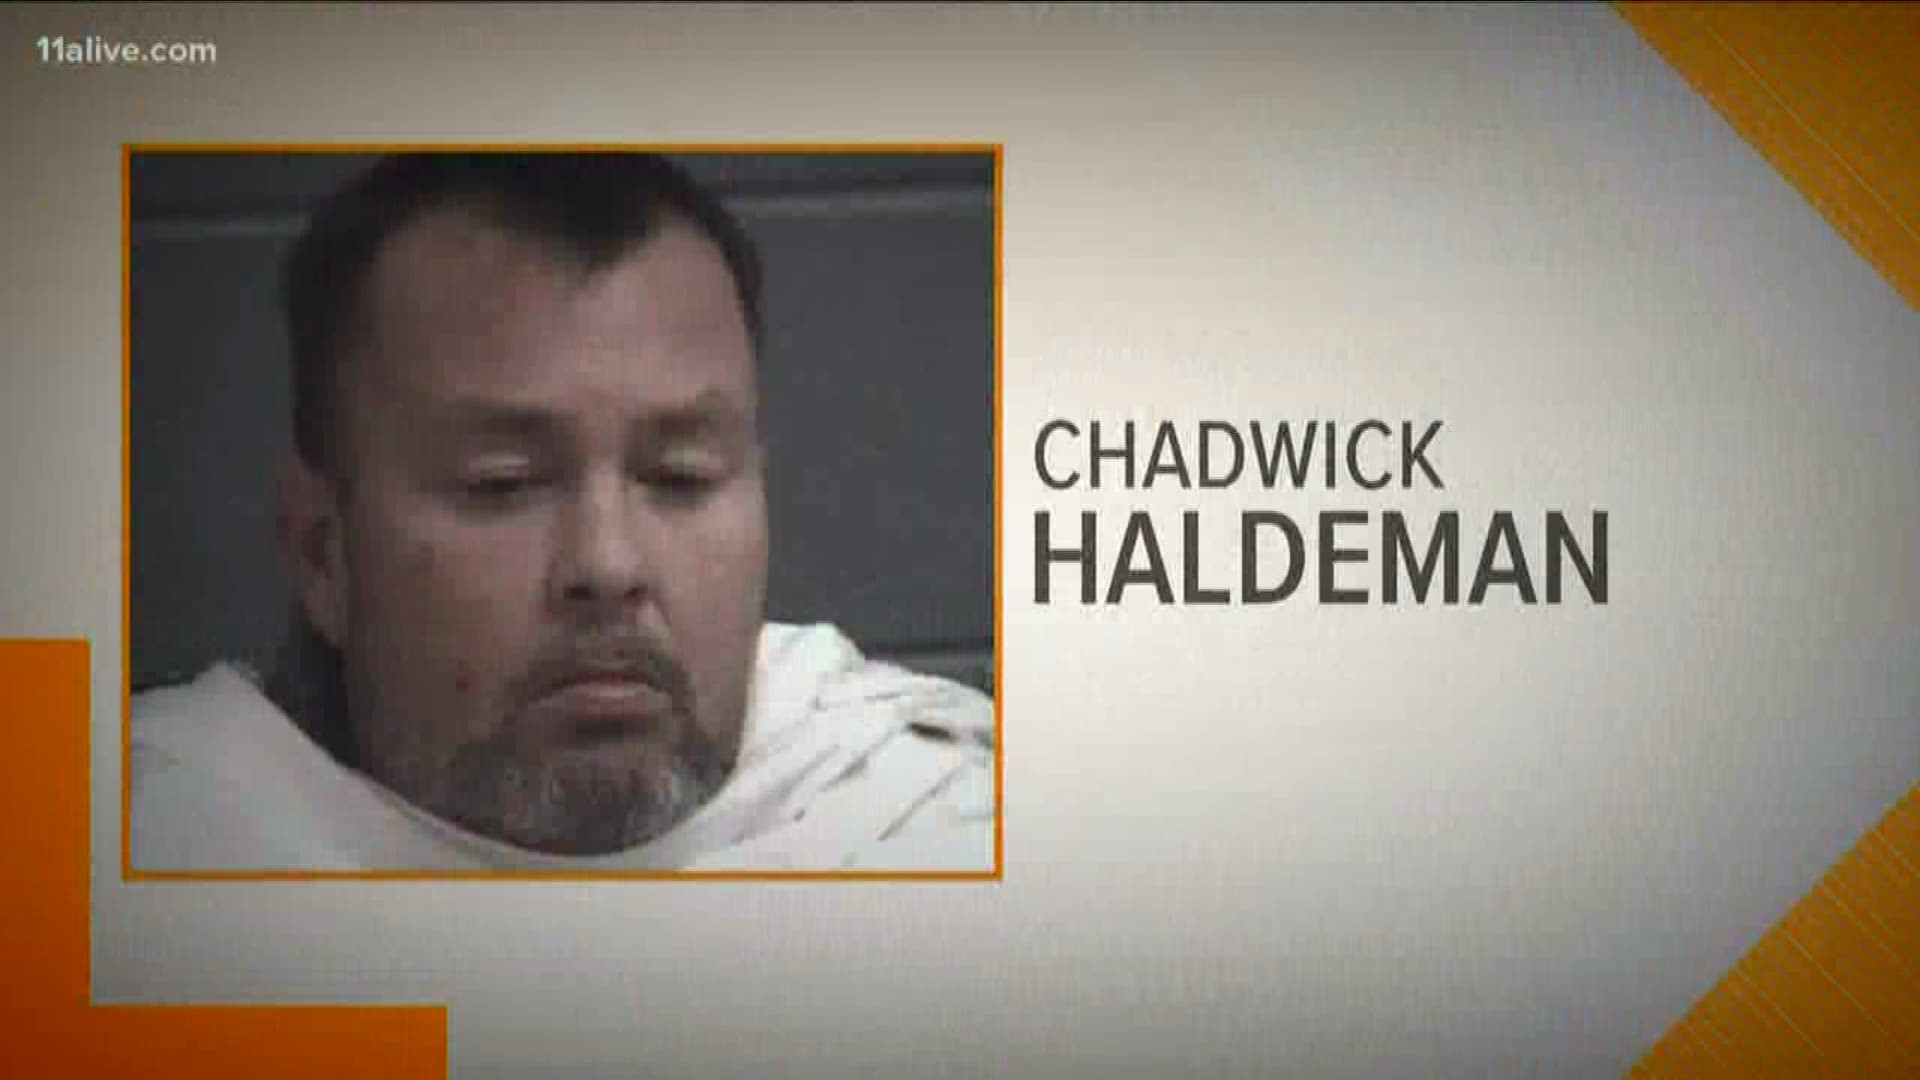 Chadwick Haldeman admitted to severely abusing and burning the 7-month-old baby with a cigarette.